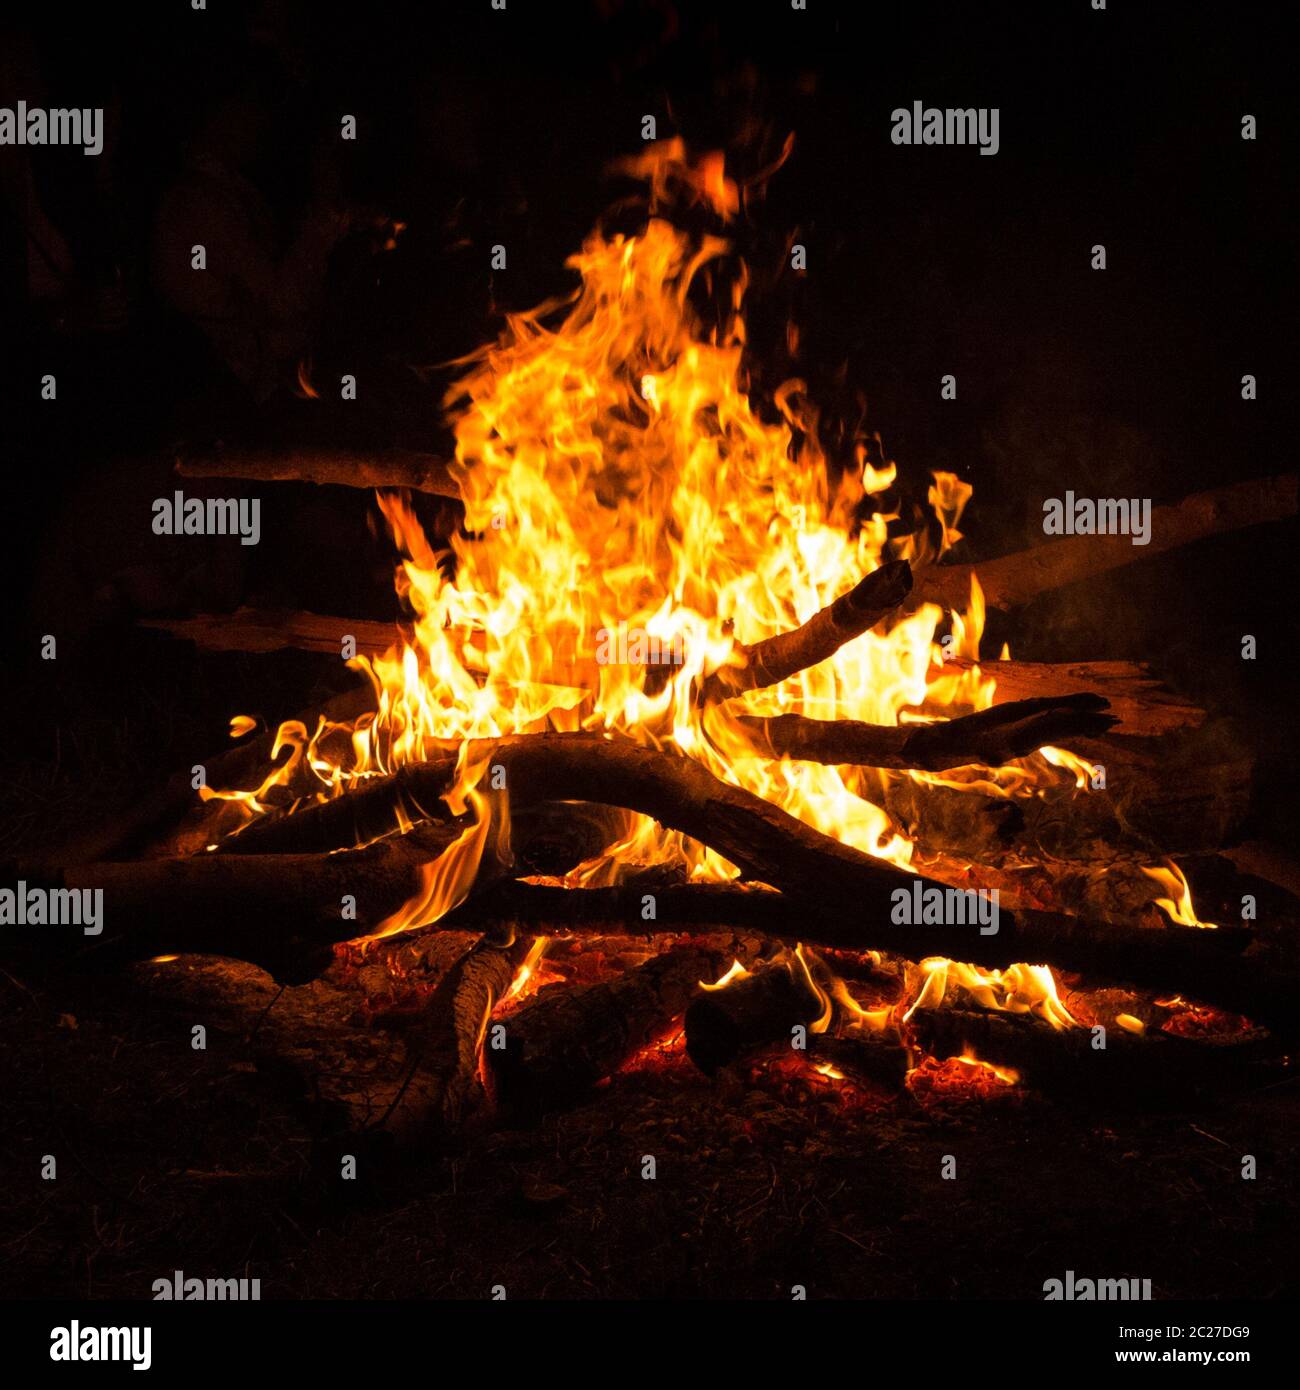 Hot campfire place full of crackling fire wood. Stock Photo